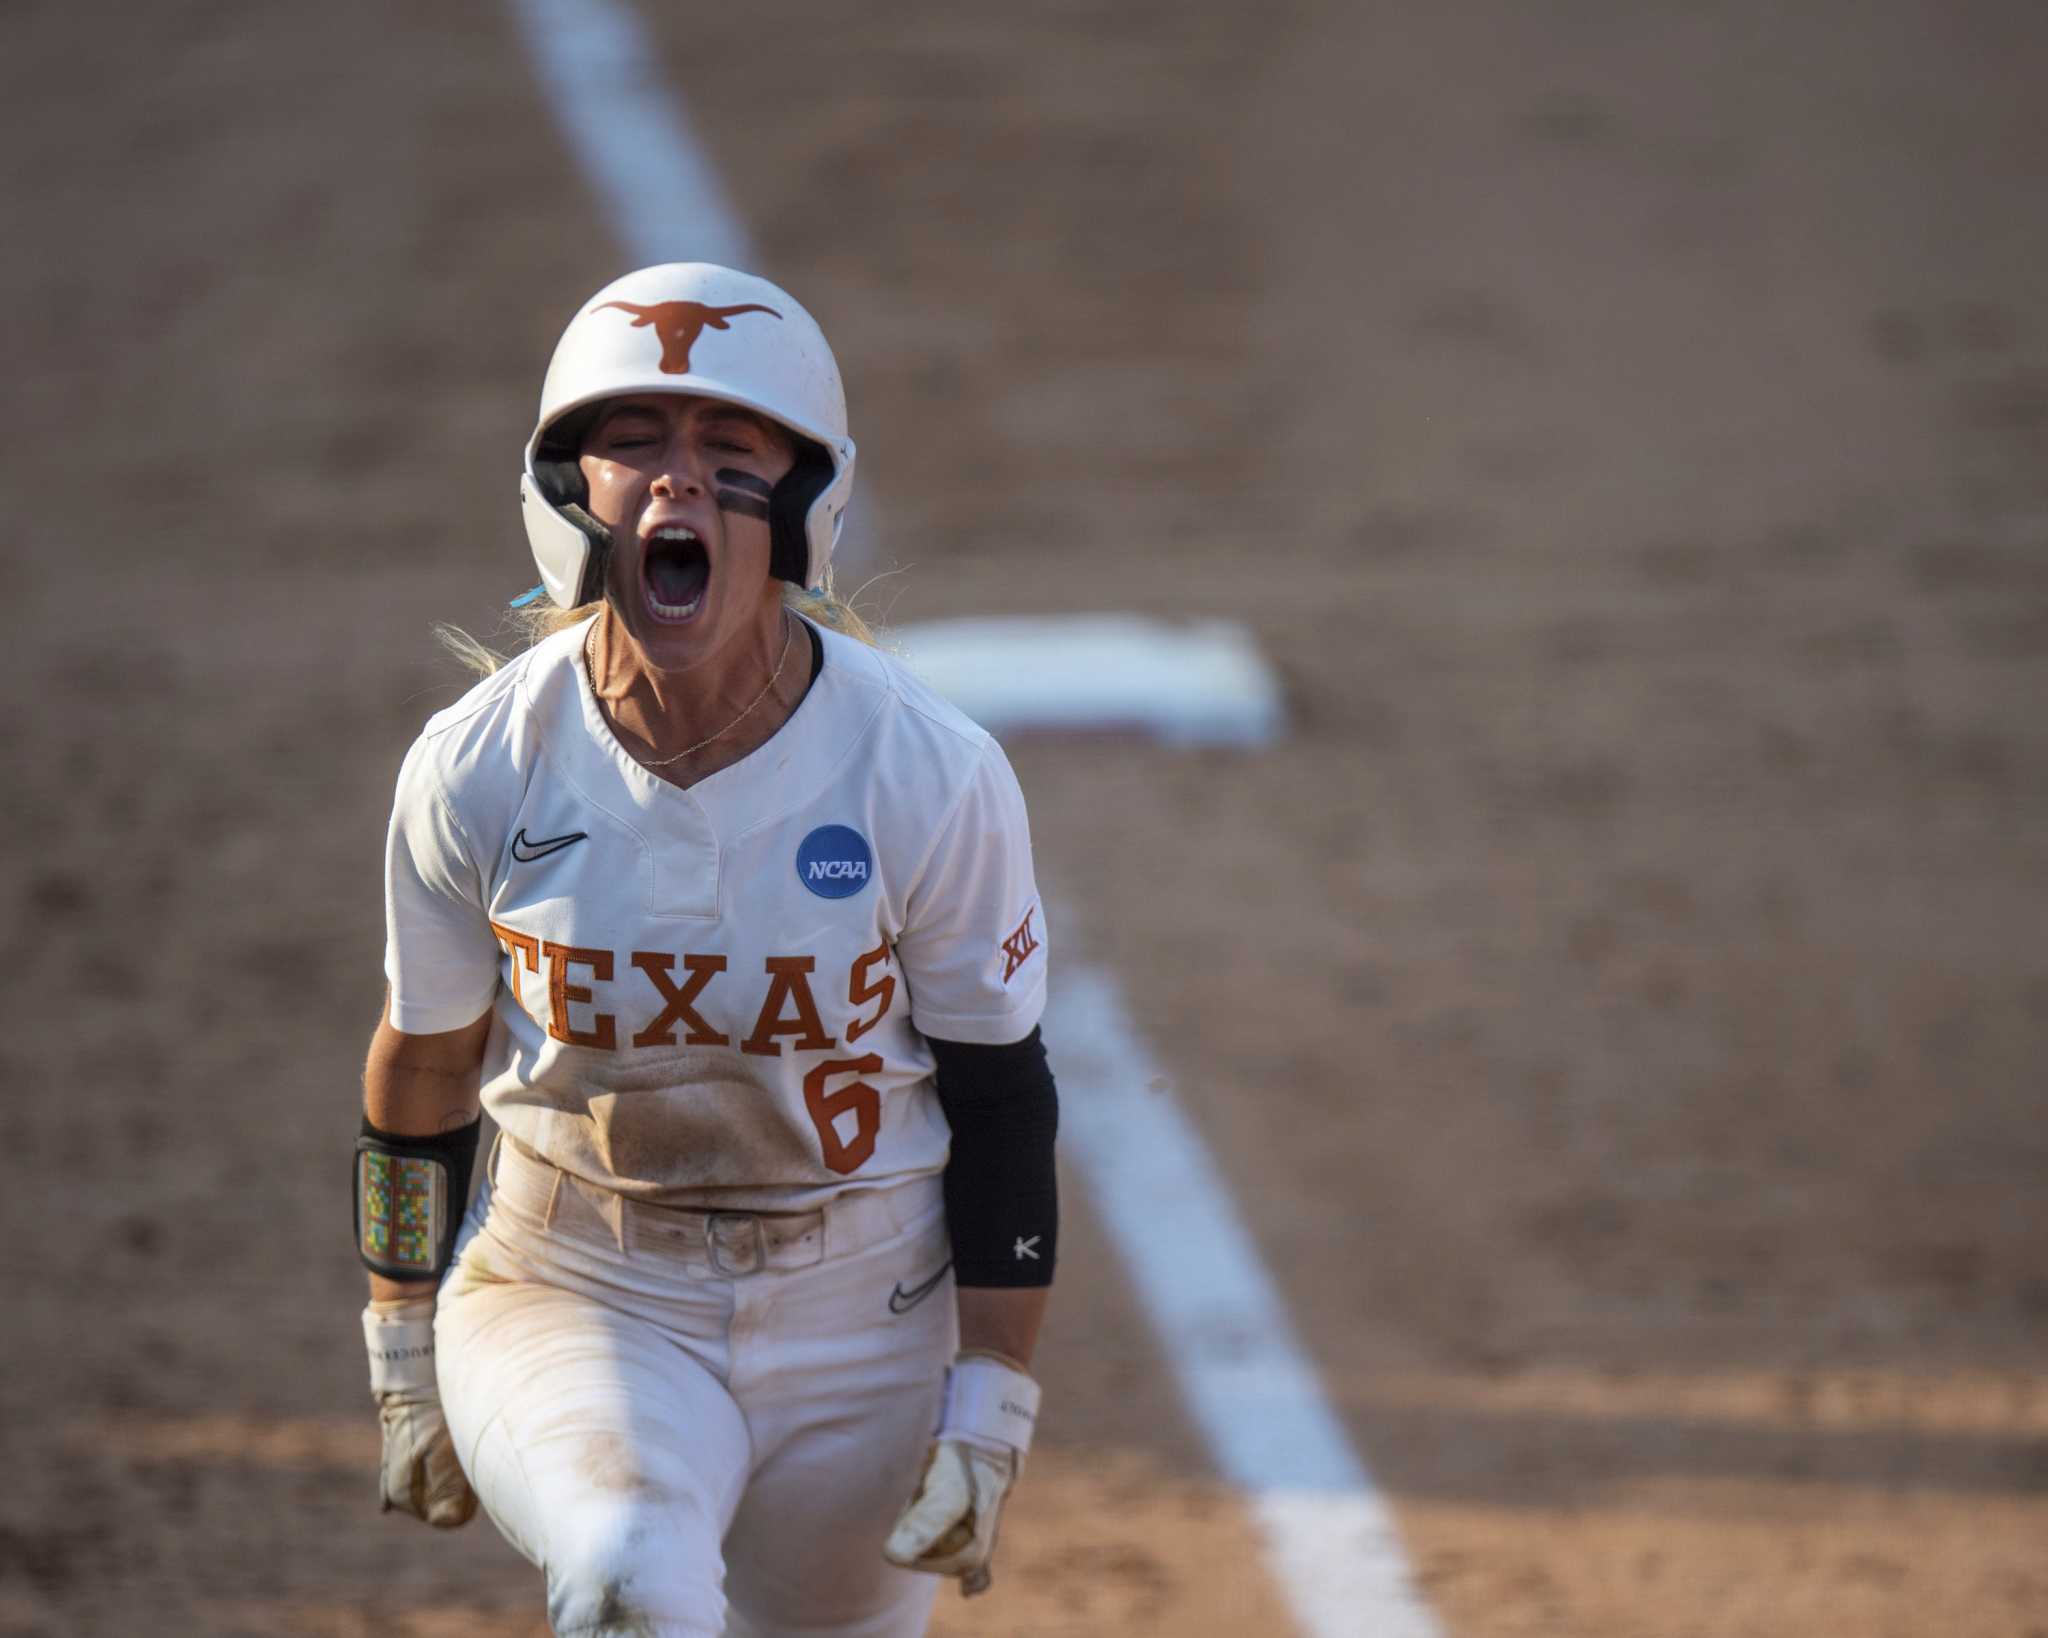 No. 1 Texas joins 3-time defending champ Oklahoma in Women's College World Series field